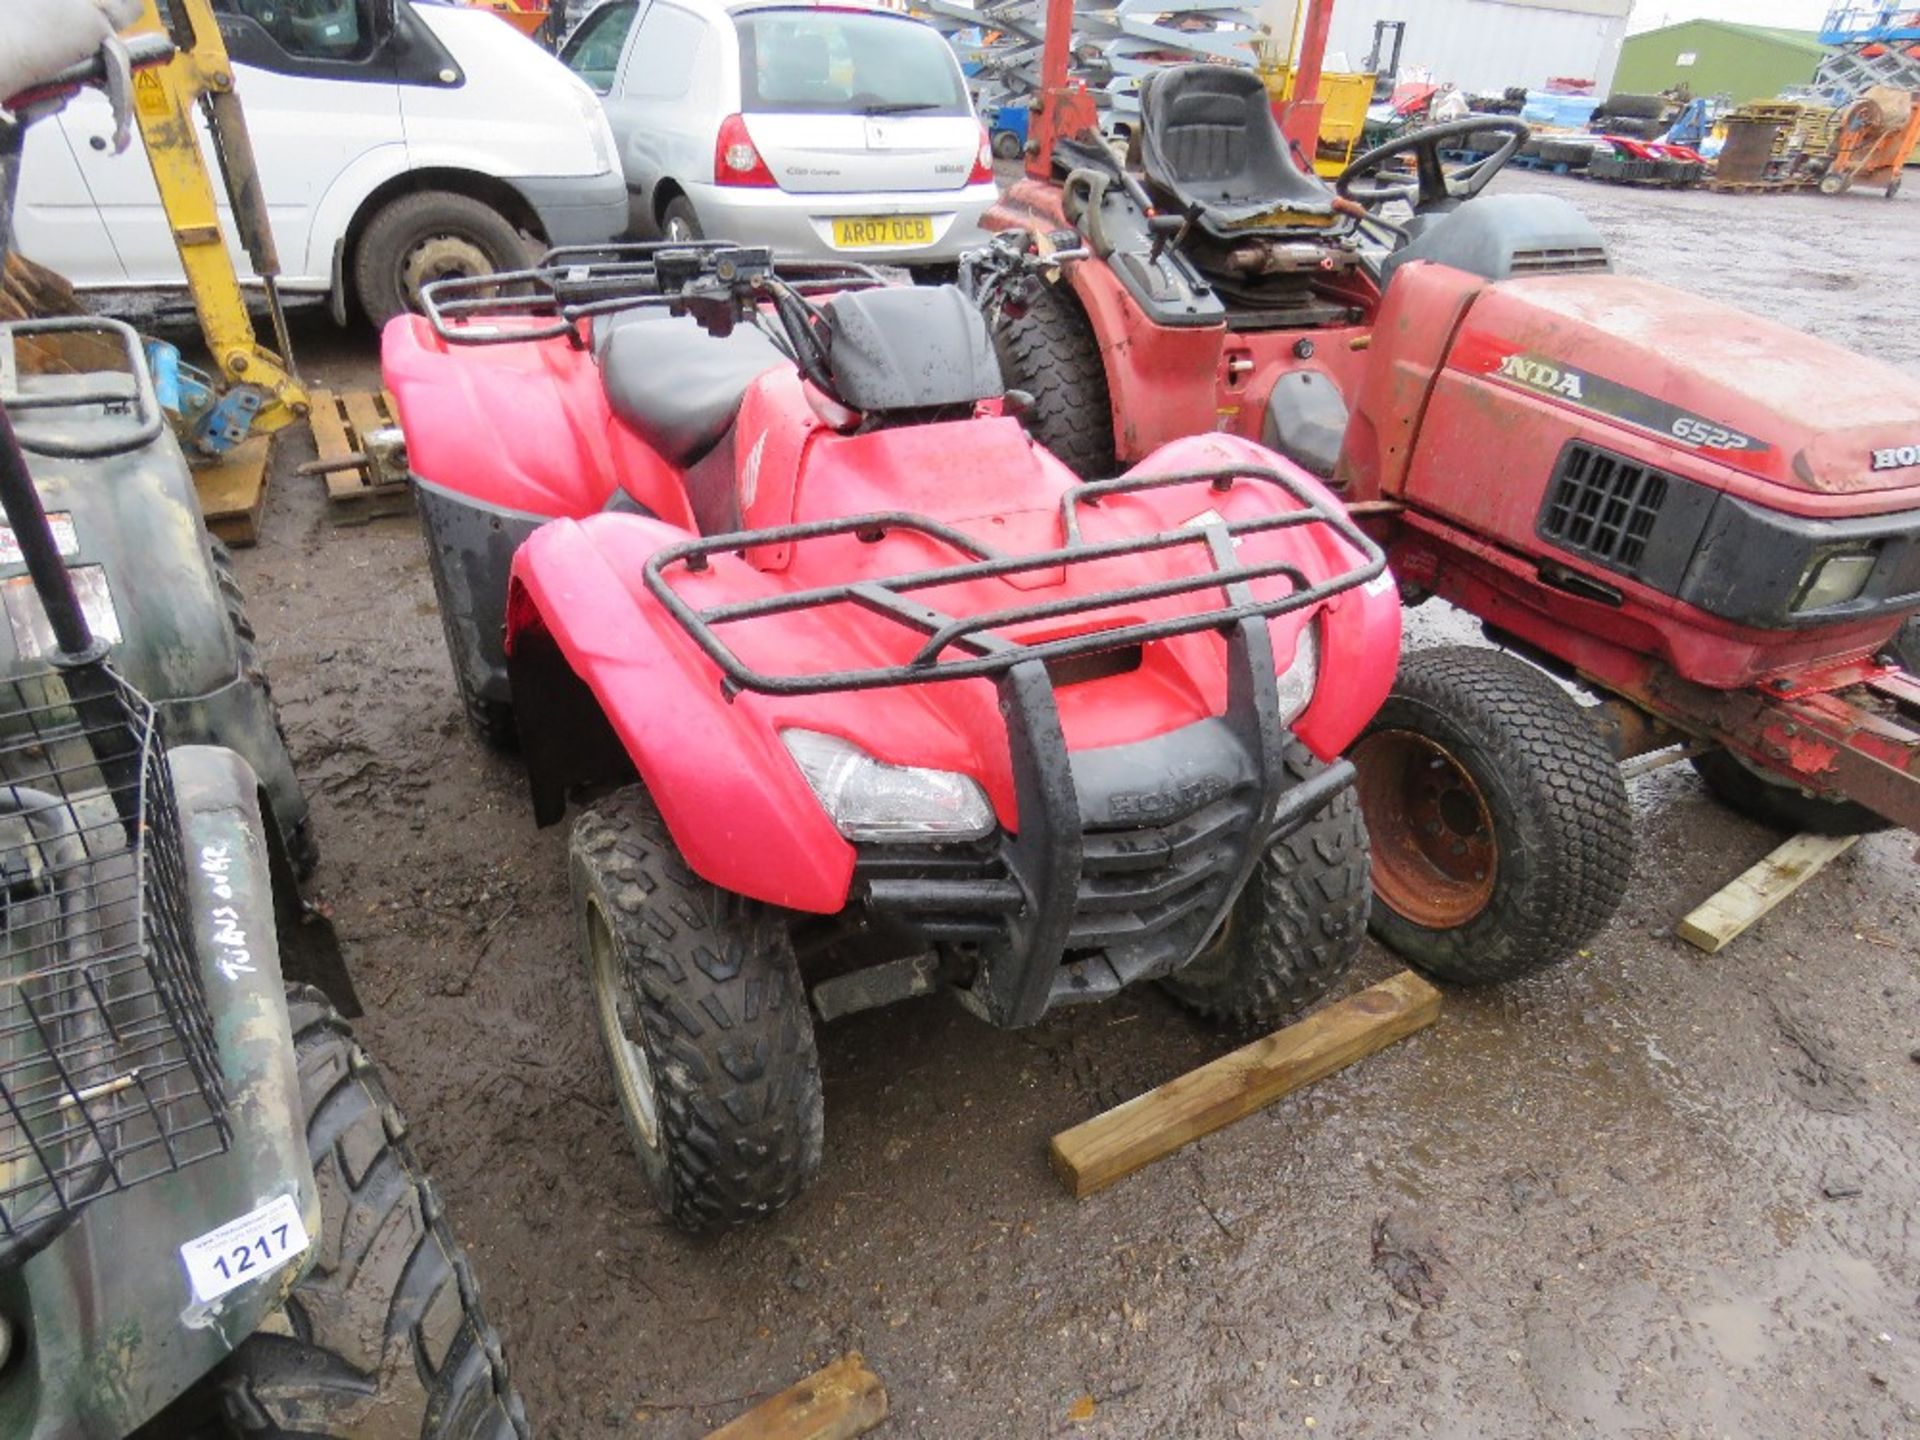 HONDA FOURTRAK 400 QUAD BIKE, YEAR 2003 APPROX. WHEN TESTED WAS SEEN TO RUN, DRIVE AND BRAKE. - Image 2 of 5